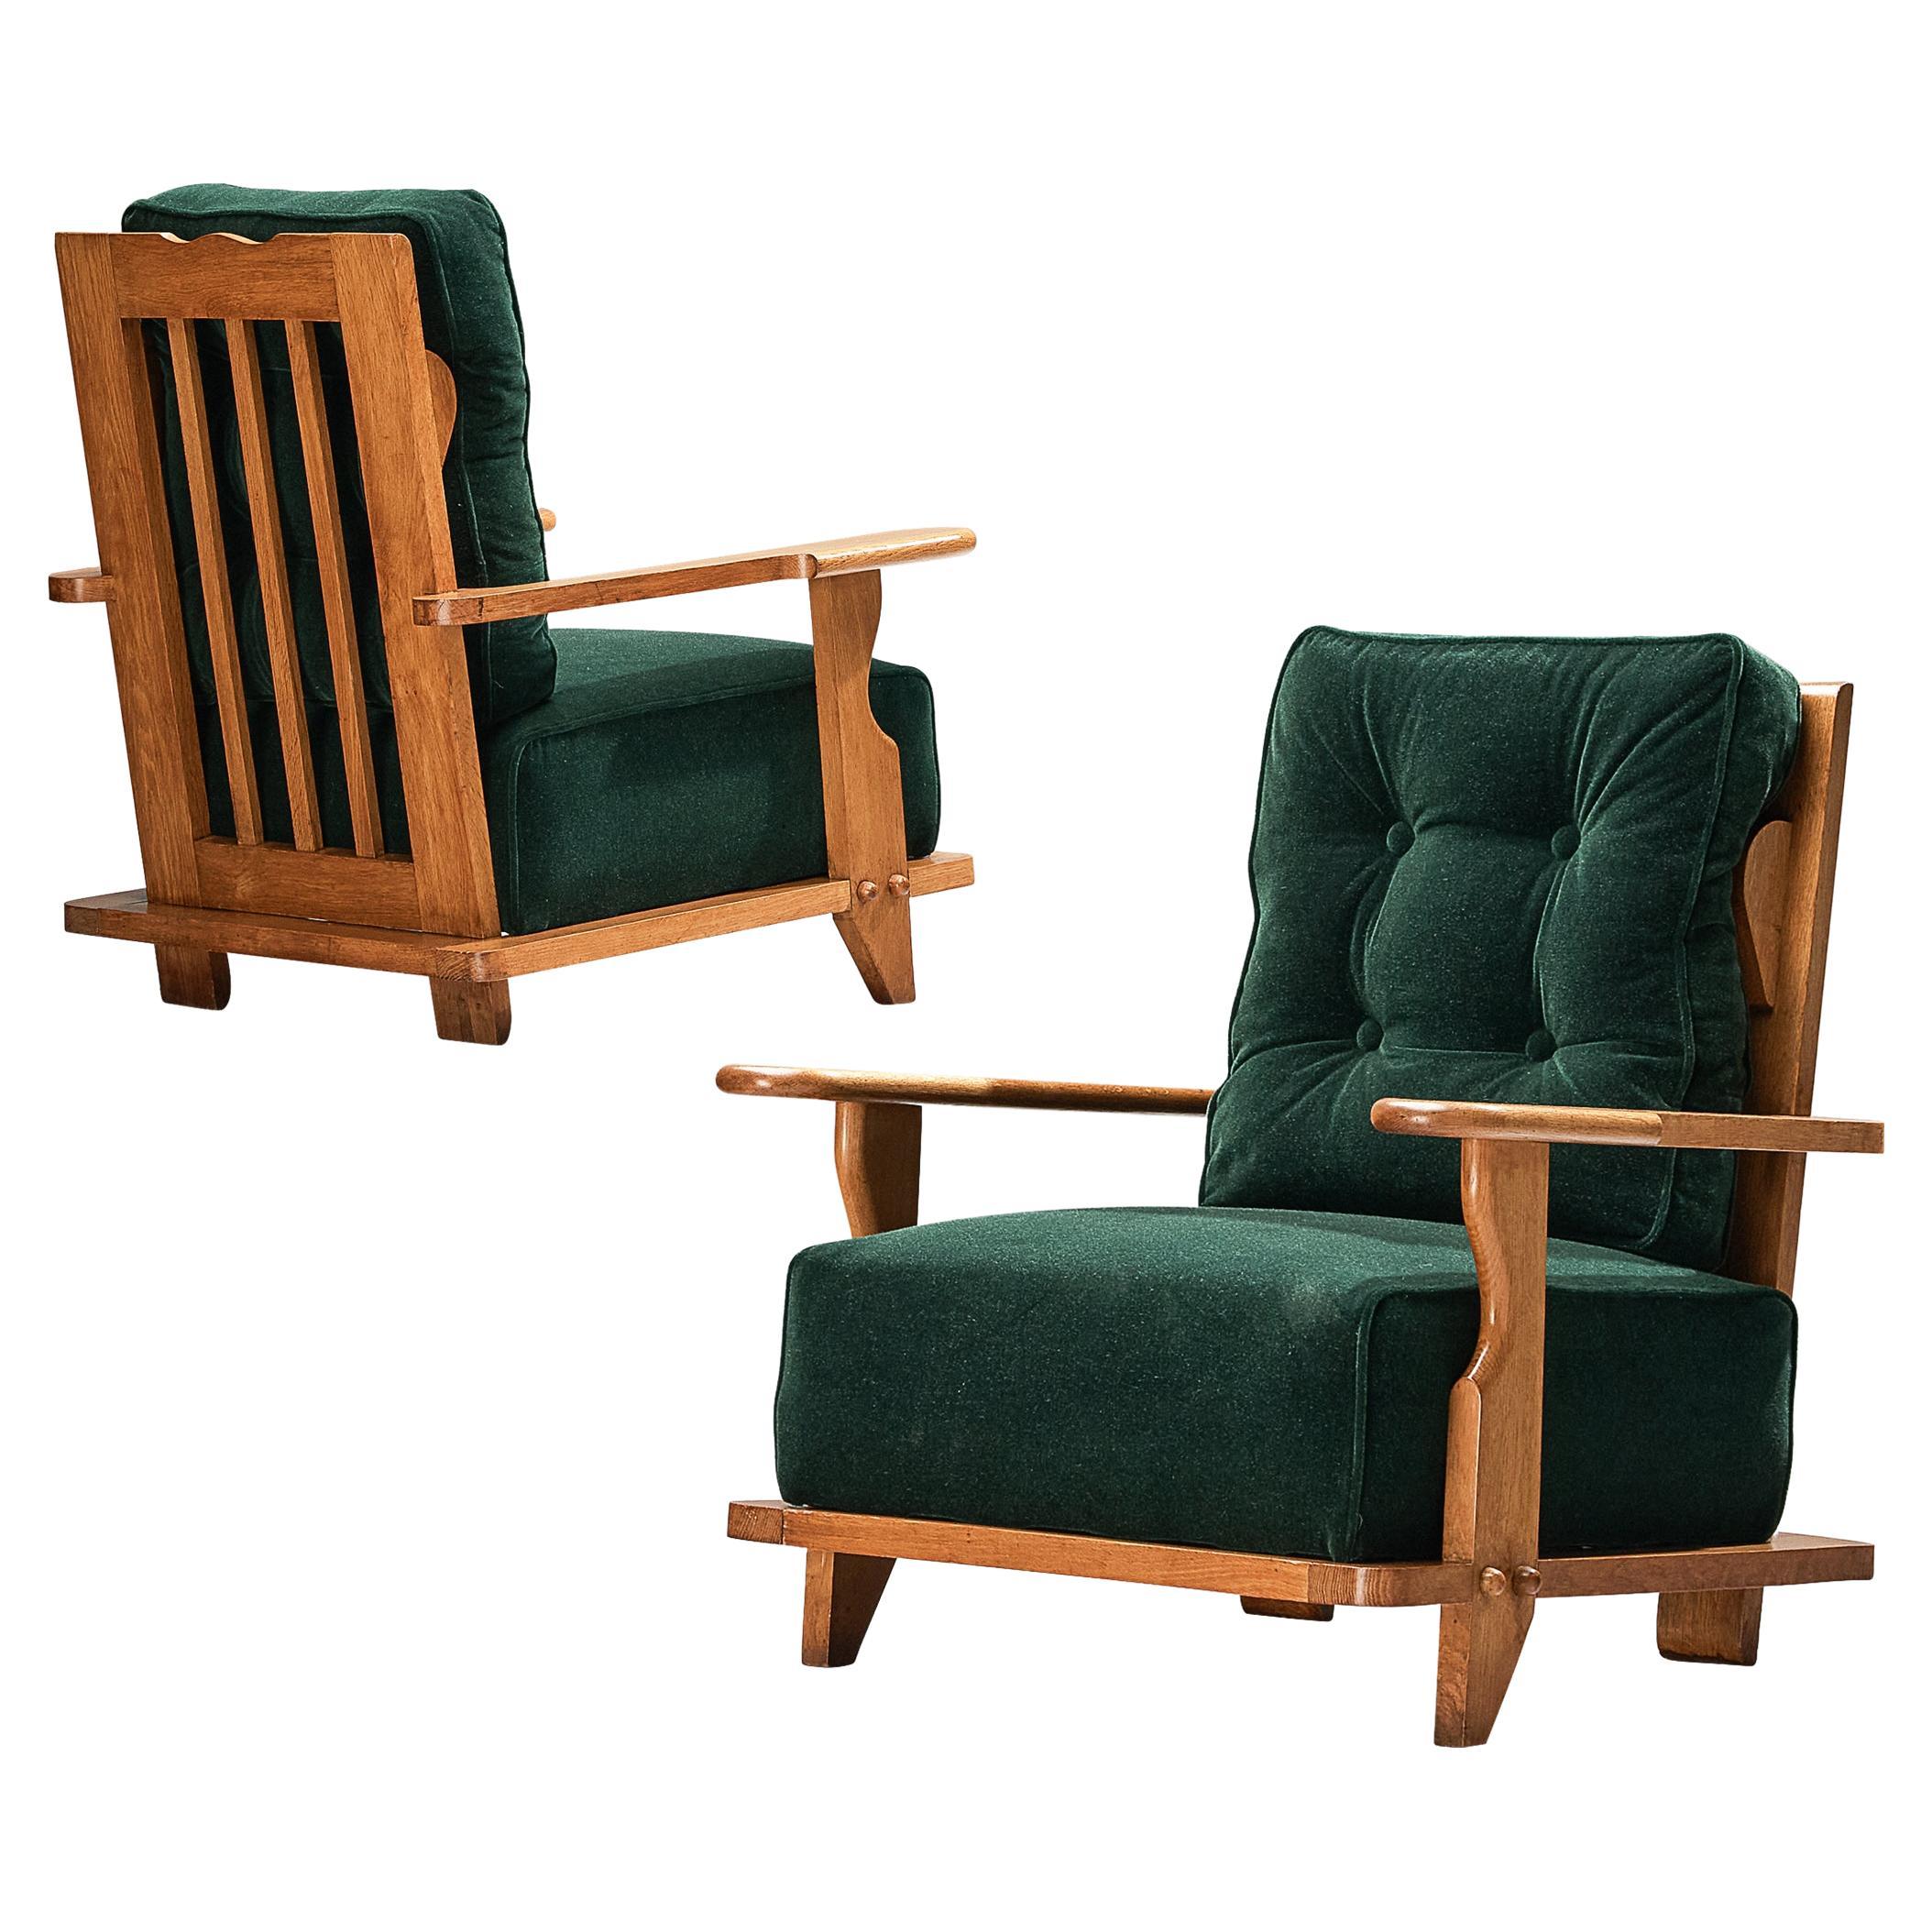 Guillerme & Chambron Pair of Lounge Chairs in Green Mohair and Oak